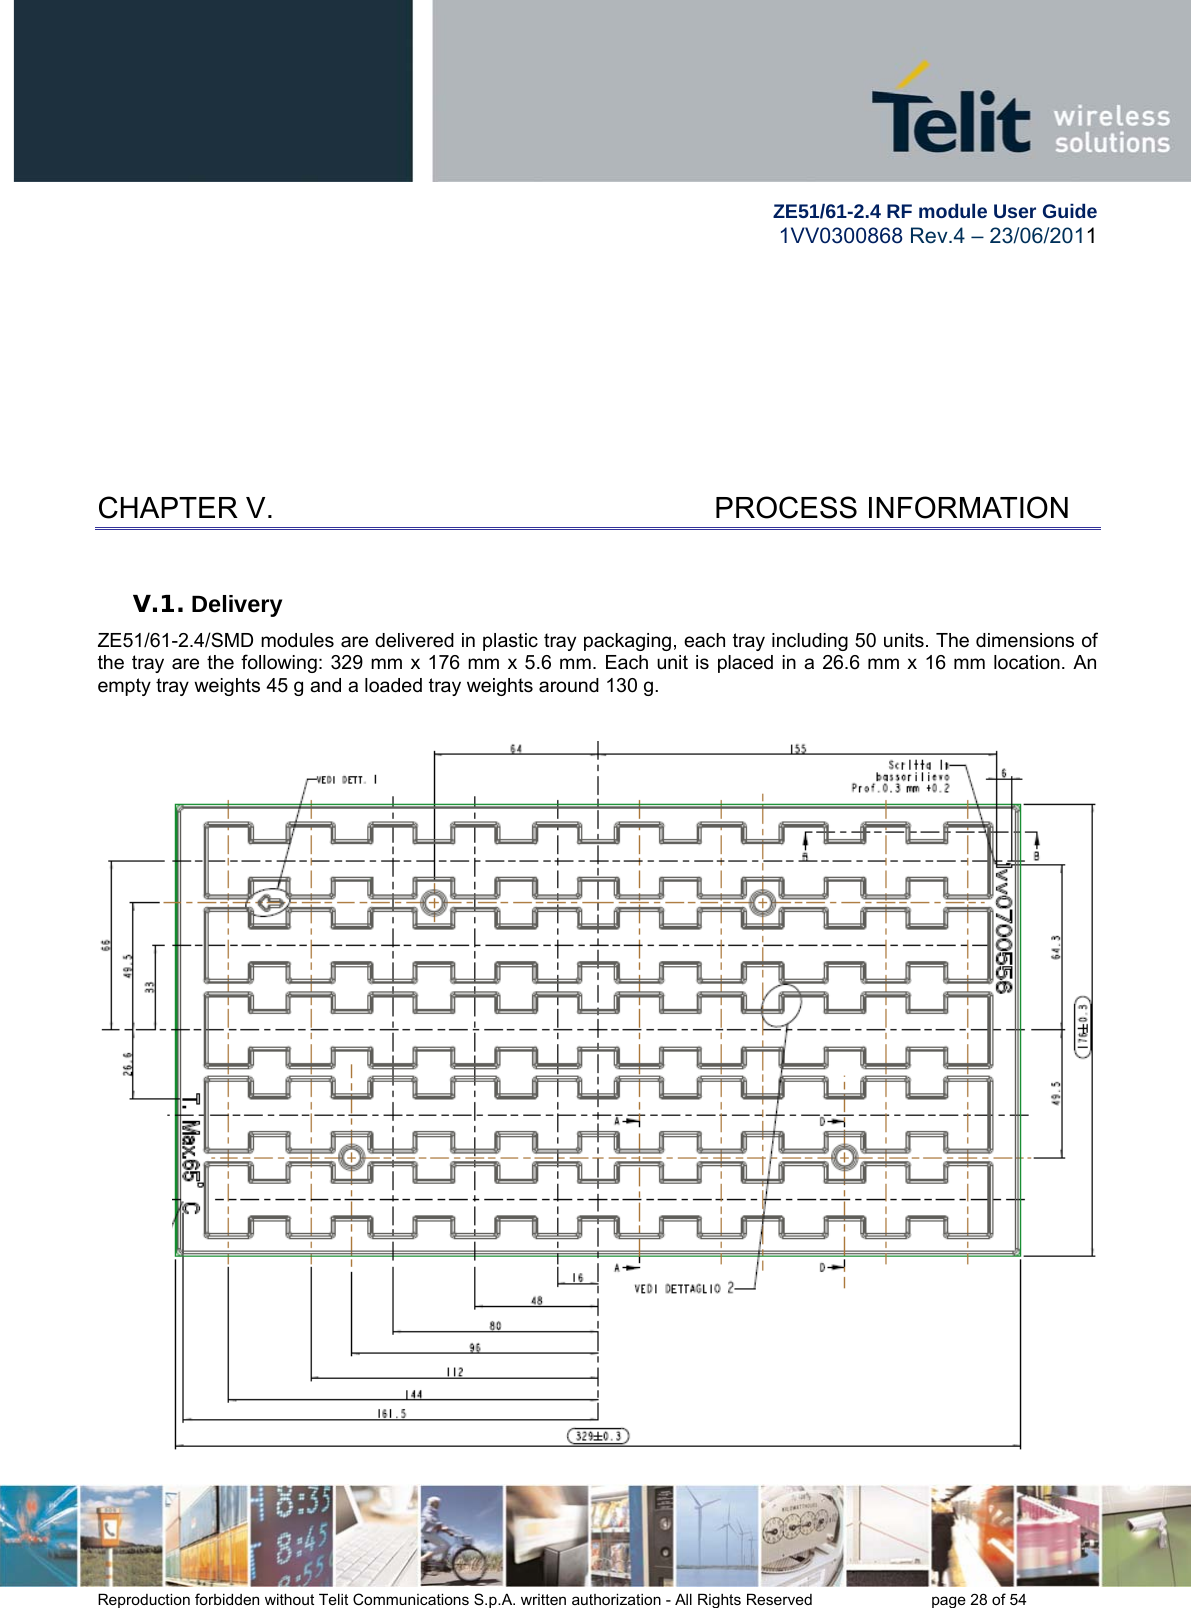         ZE51/61-2.4 RF module User Guide 1VV0300868 Rev.4 – 23/06/2011 Reproduction forbidden without Telit Communications S.p.A. written authorization - All Rights Reserved    page 28 of 54   CHAPTER V.    PROCESS INFORMATION V.1. Delivery ZE51/61-2.4/SMD modules are delivered in plastic tray packaging, each tray including 50 units. The dimensions of the tray are the following: 329 mm x 176 mm x 5.6 mm. Each unit is placed in a 26.6 mm x 16 mm location. An empty tray weights 45 g and a loaded tray weights around 130 g.     